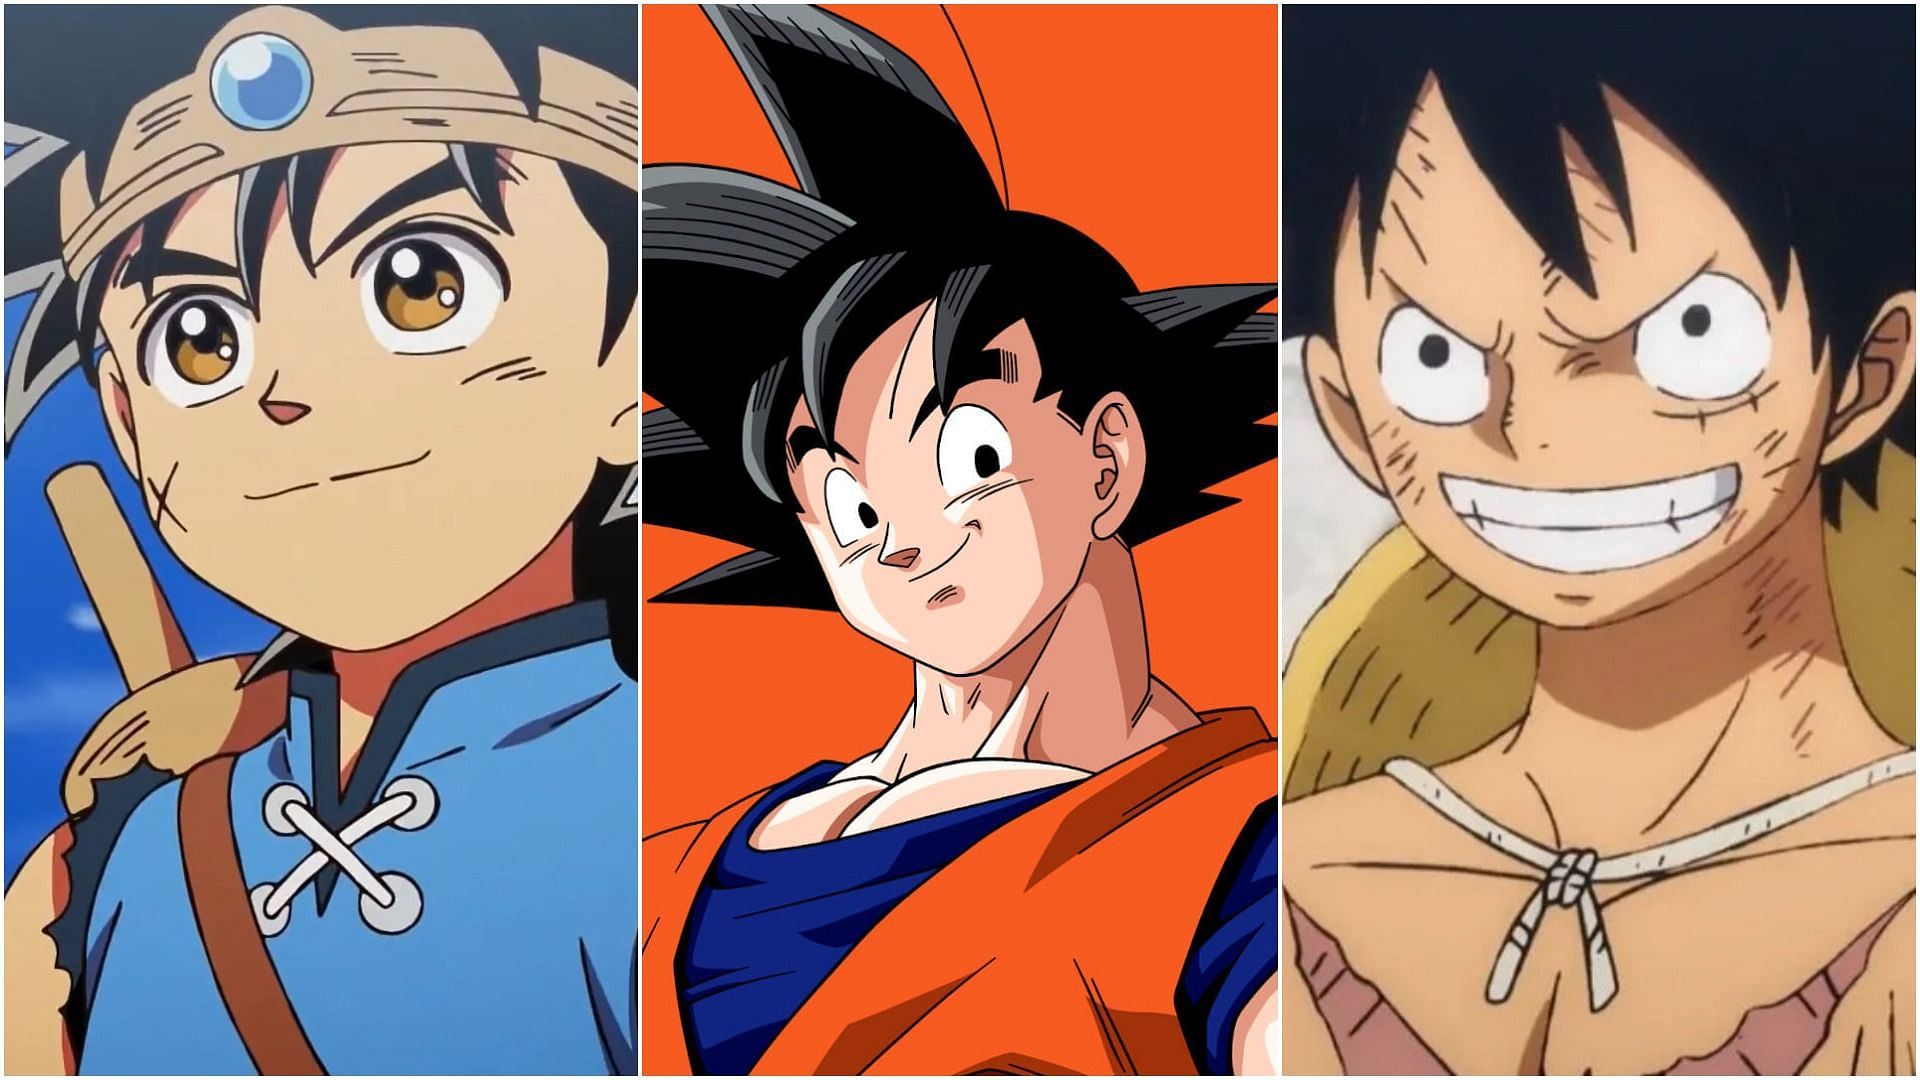 The Dragon Quest, Dragon Ball, and One Piece franchises were all impacted by the ransomware attack (Images via Toei Animation)